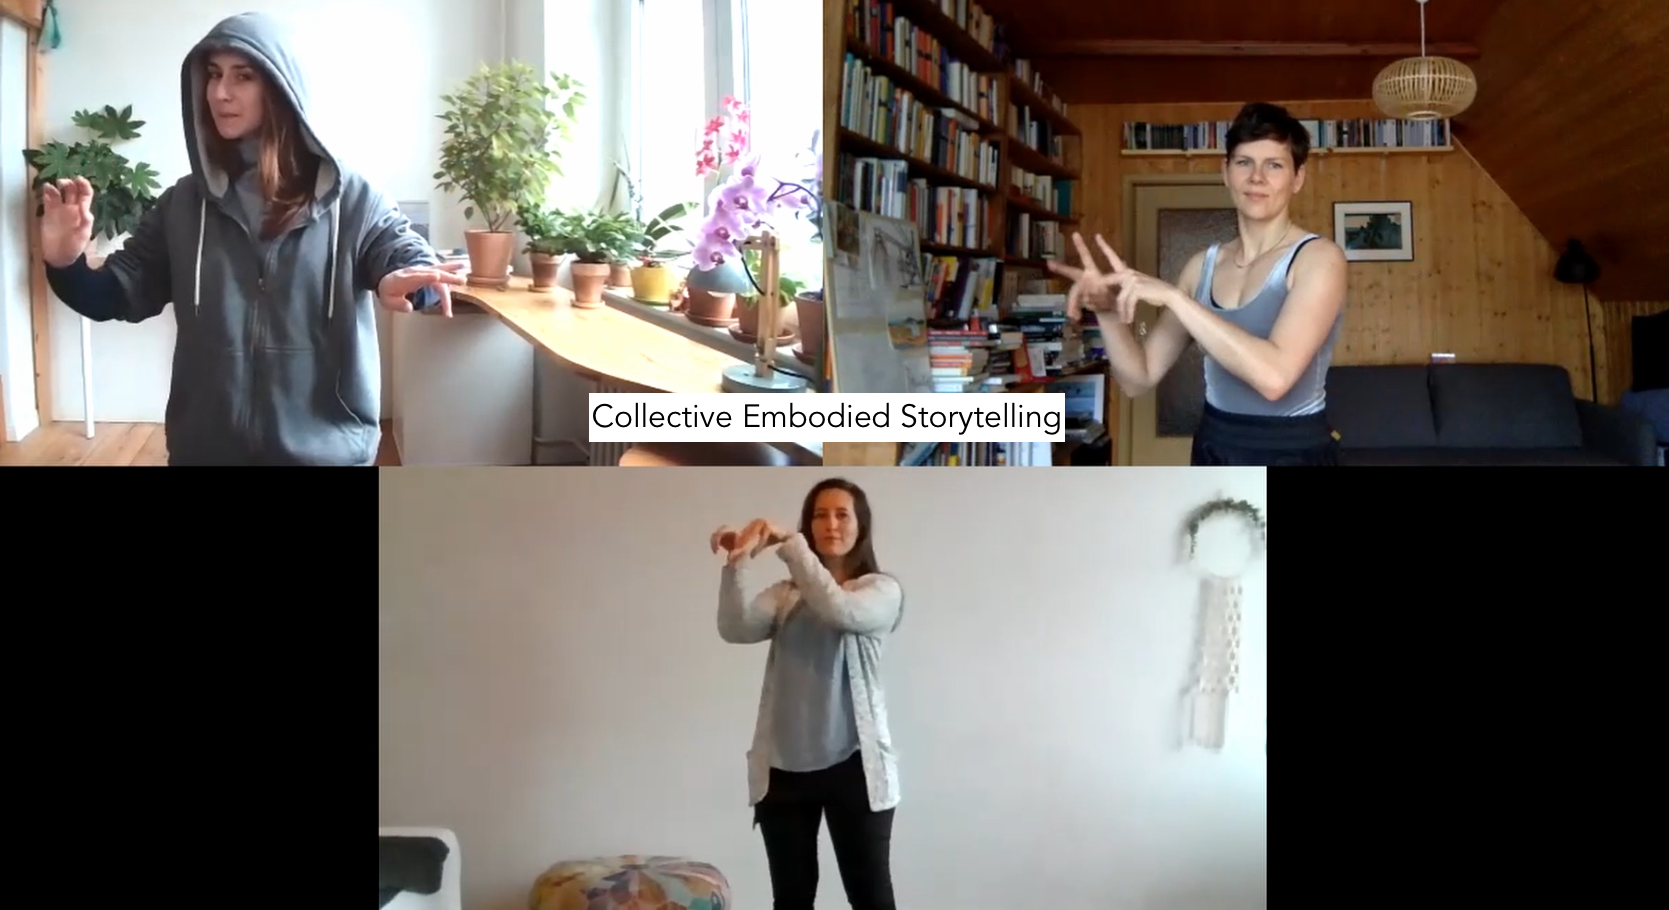 Collective Embodied Storytelling